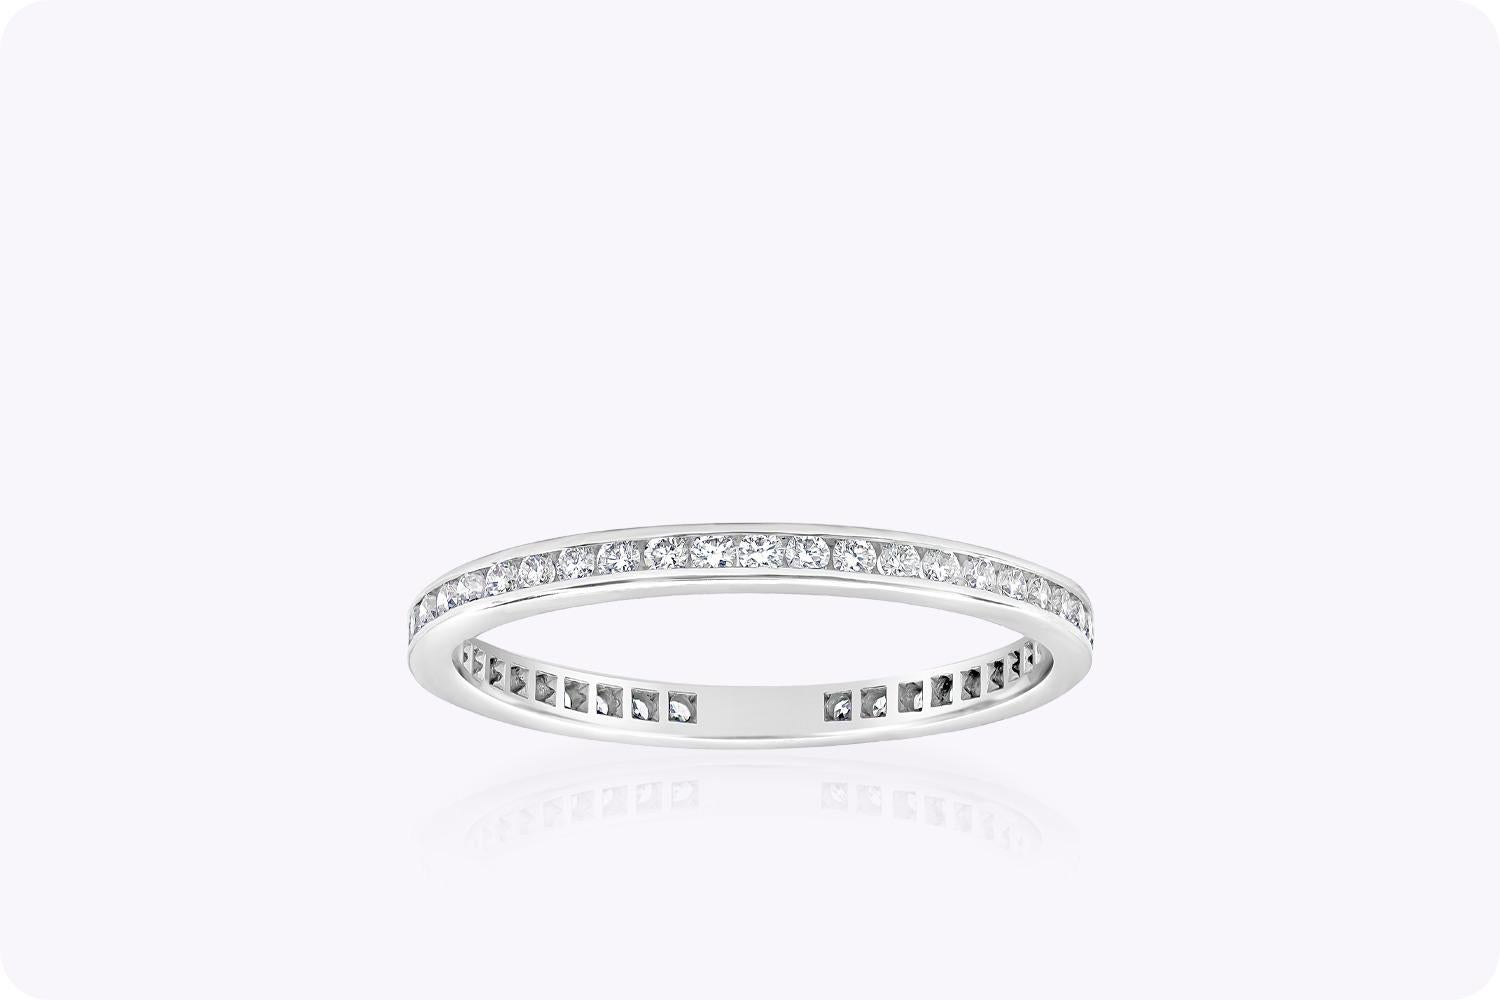 An 18 karat white gold wedding band showcasing round brilliant diamonds in a channel setting. Diamonds weigh 0.38 carats total. Size 6.5 US.

